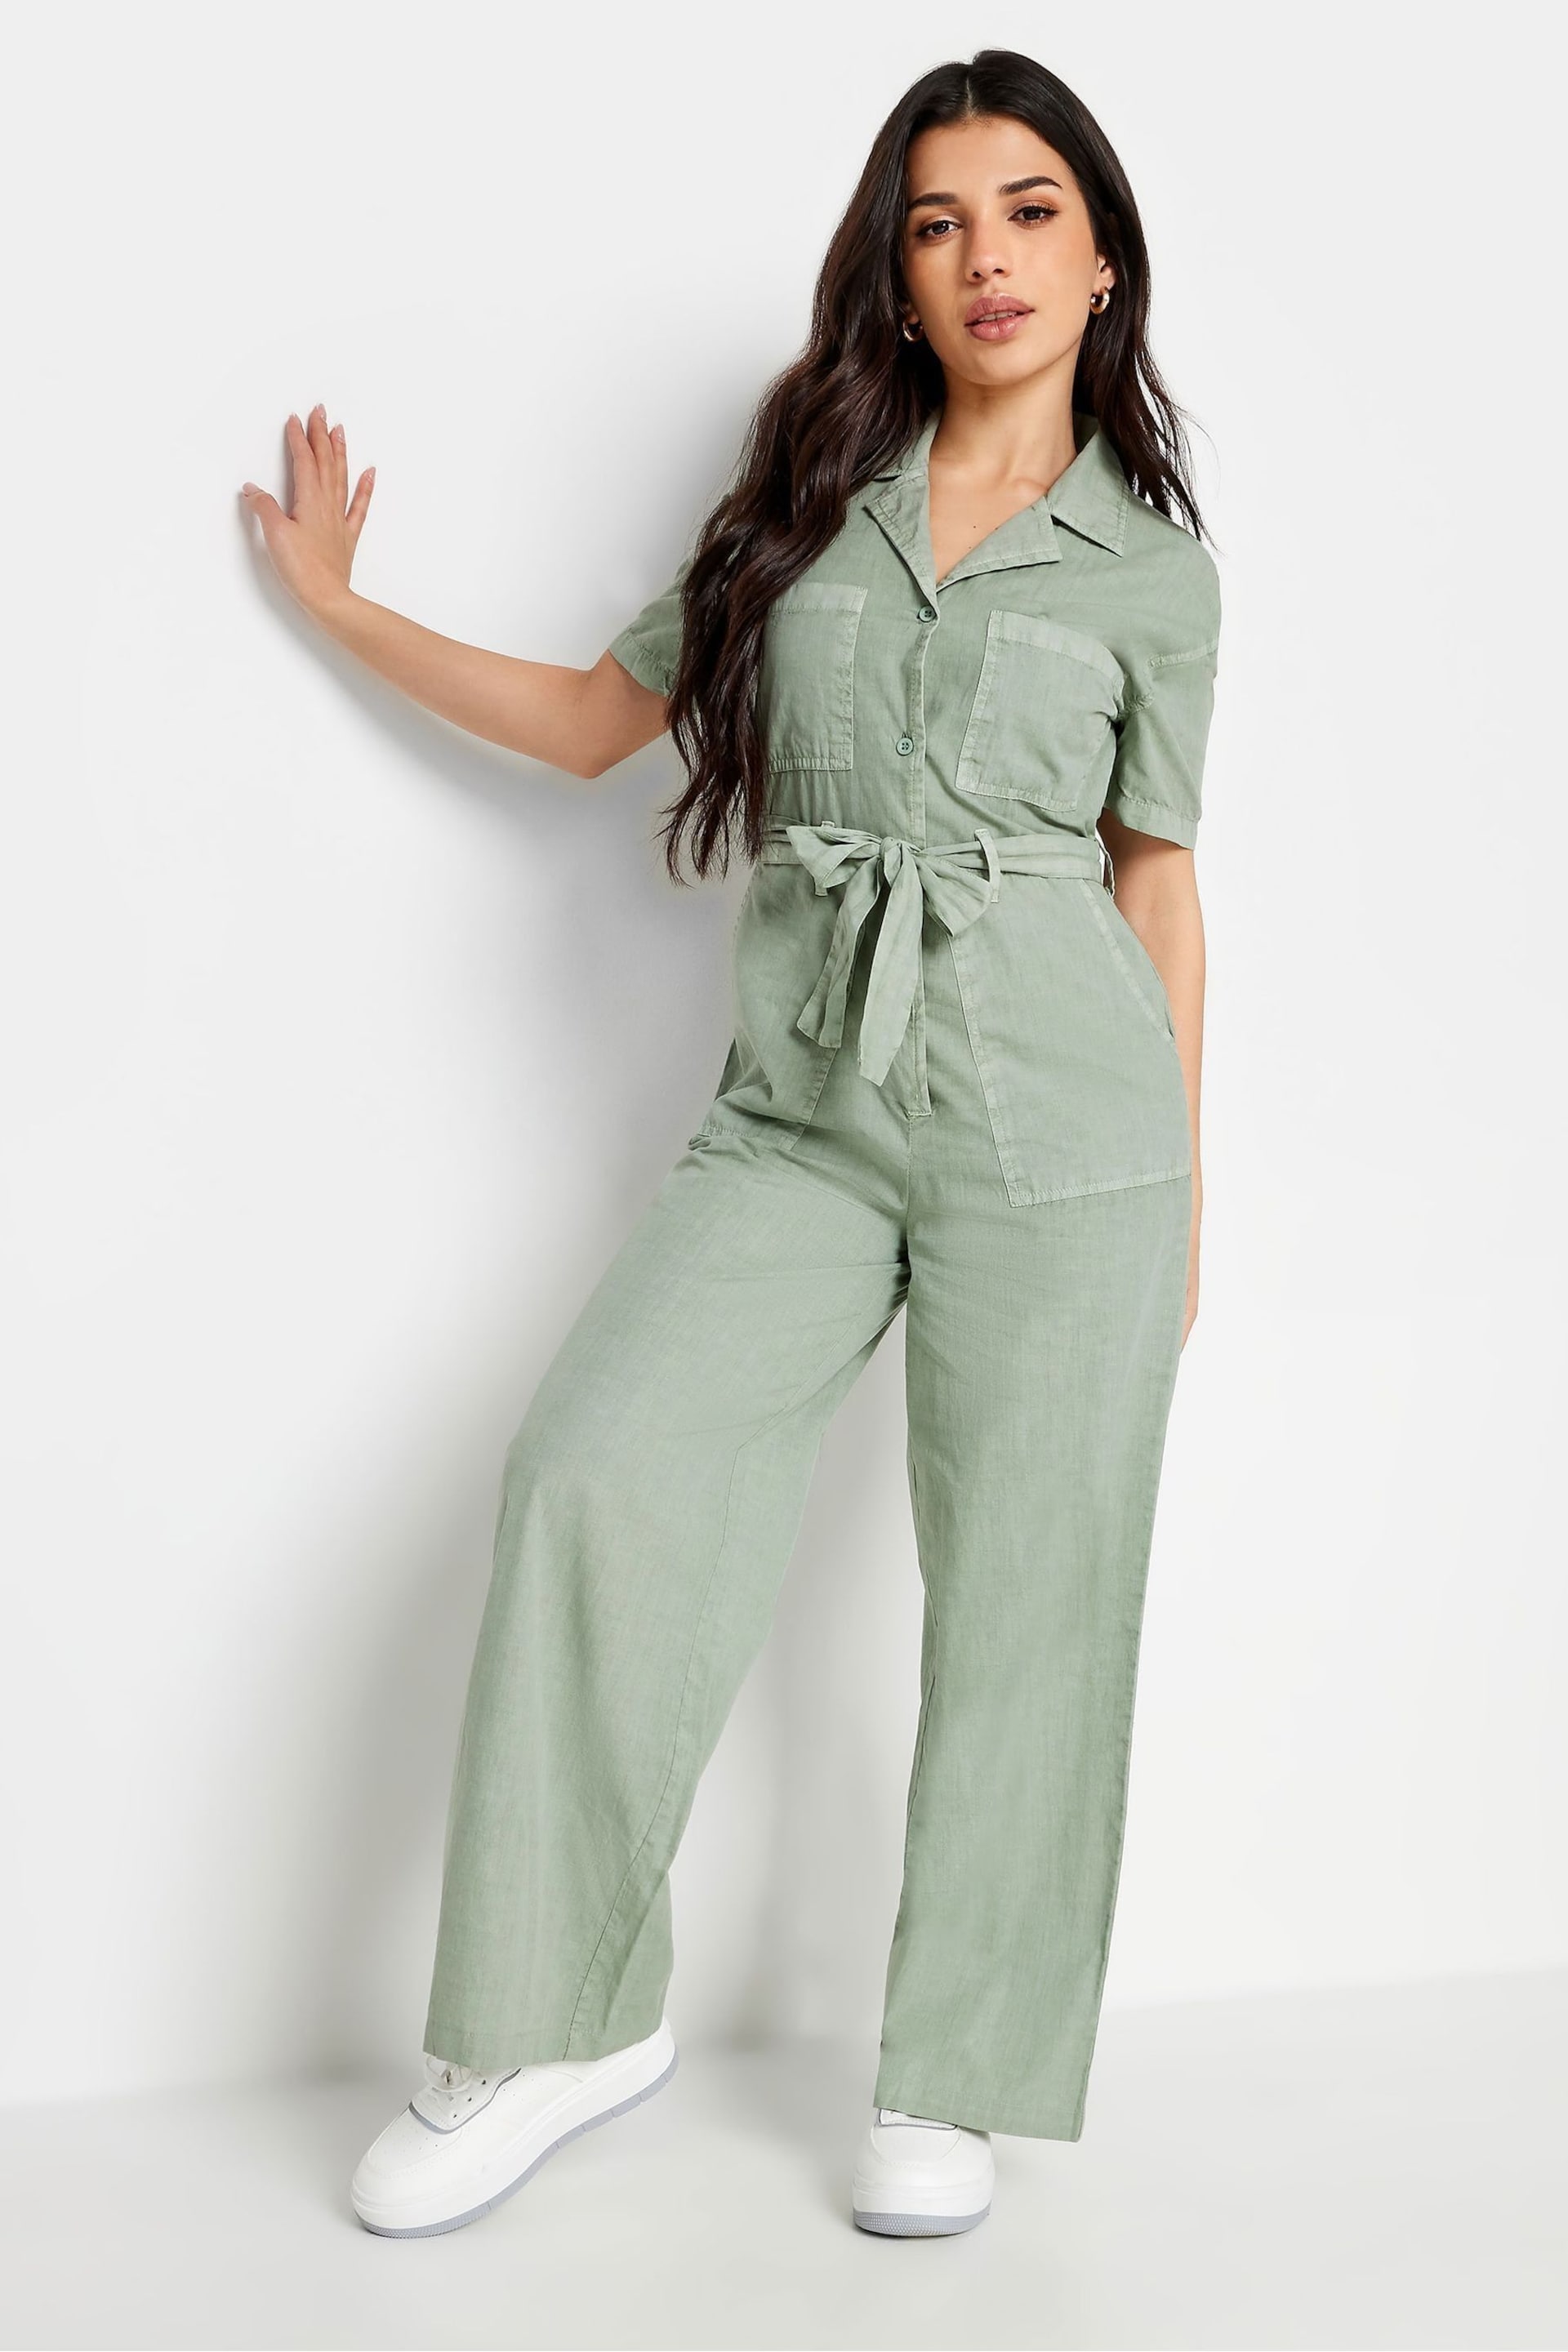 PixieGirl Petite Green Utility Washed Jumpsuit - Image 1 of 4